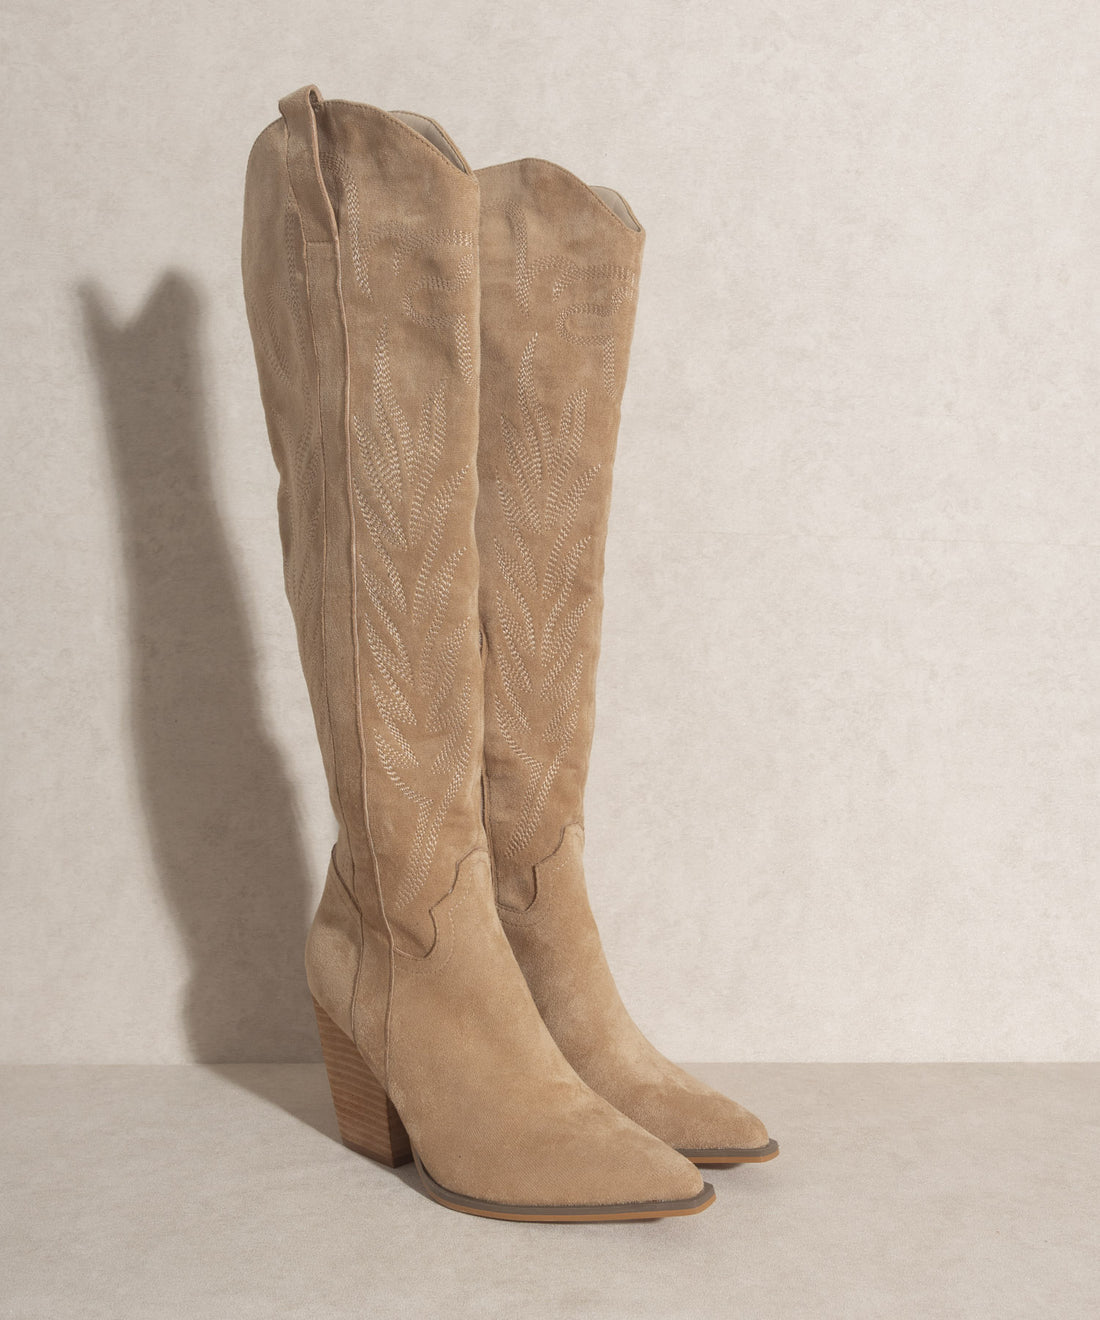 The Bronco Knee High Boots PRE ORDER